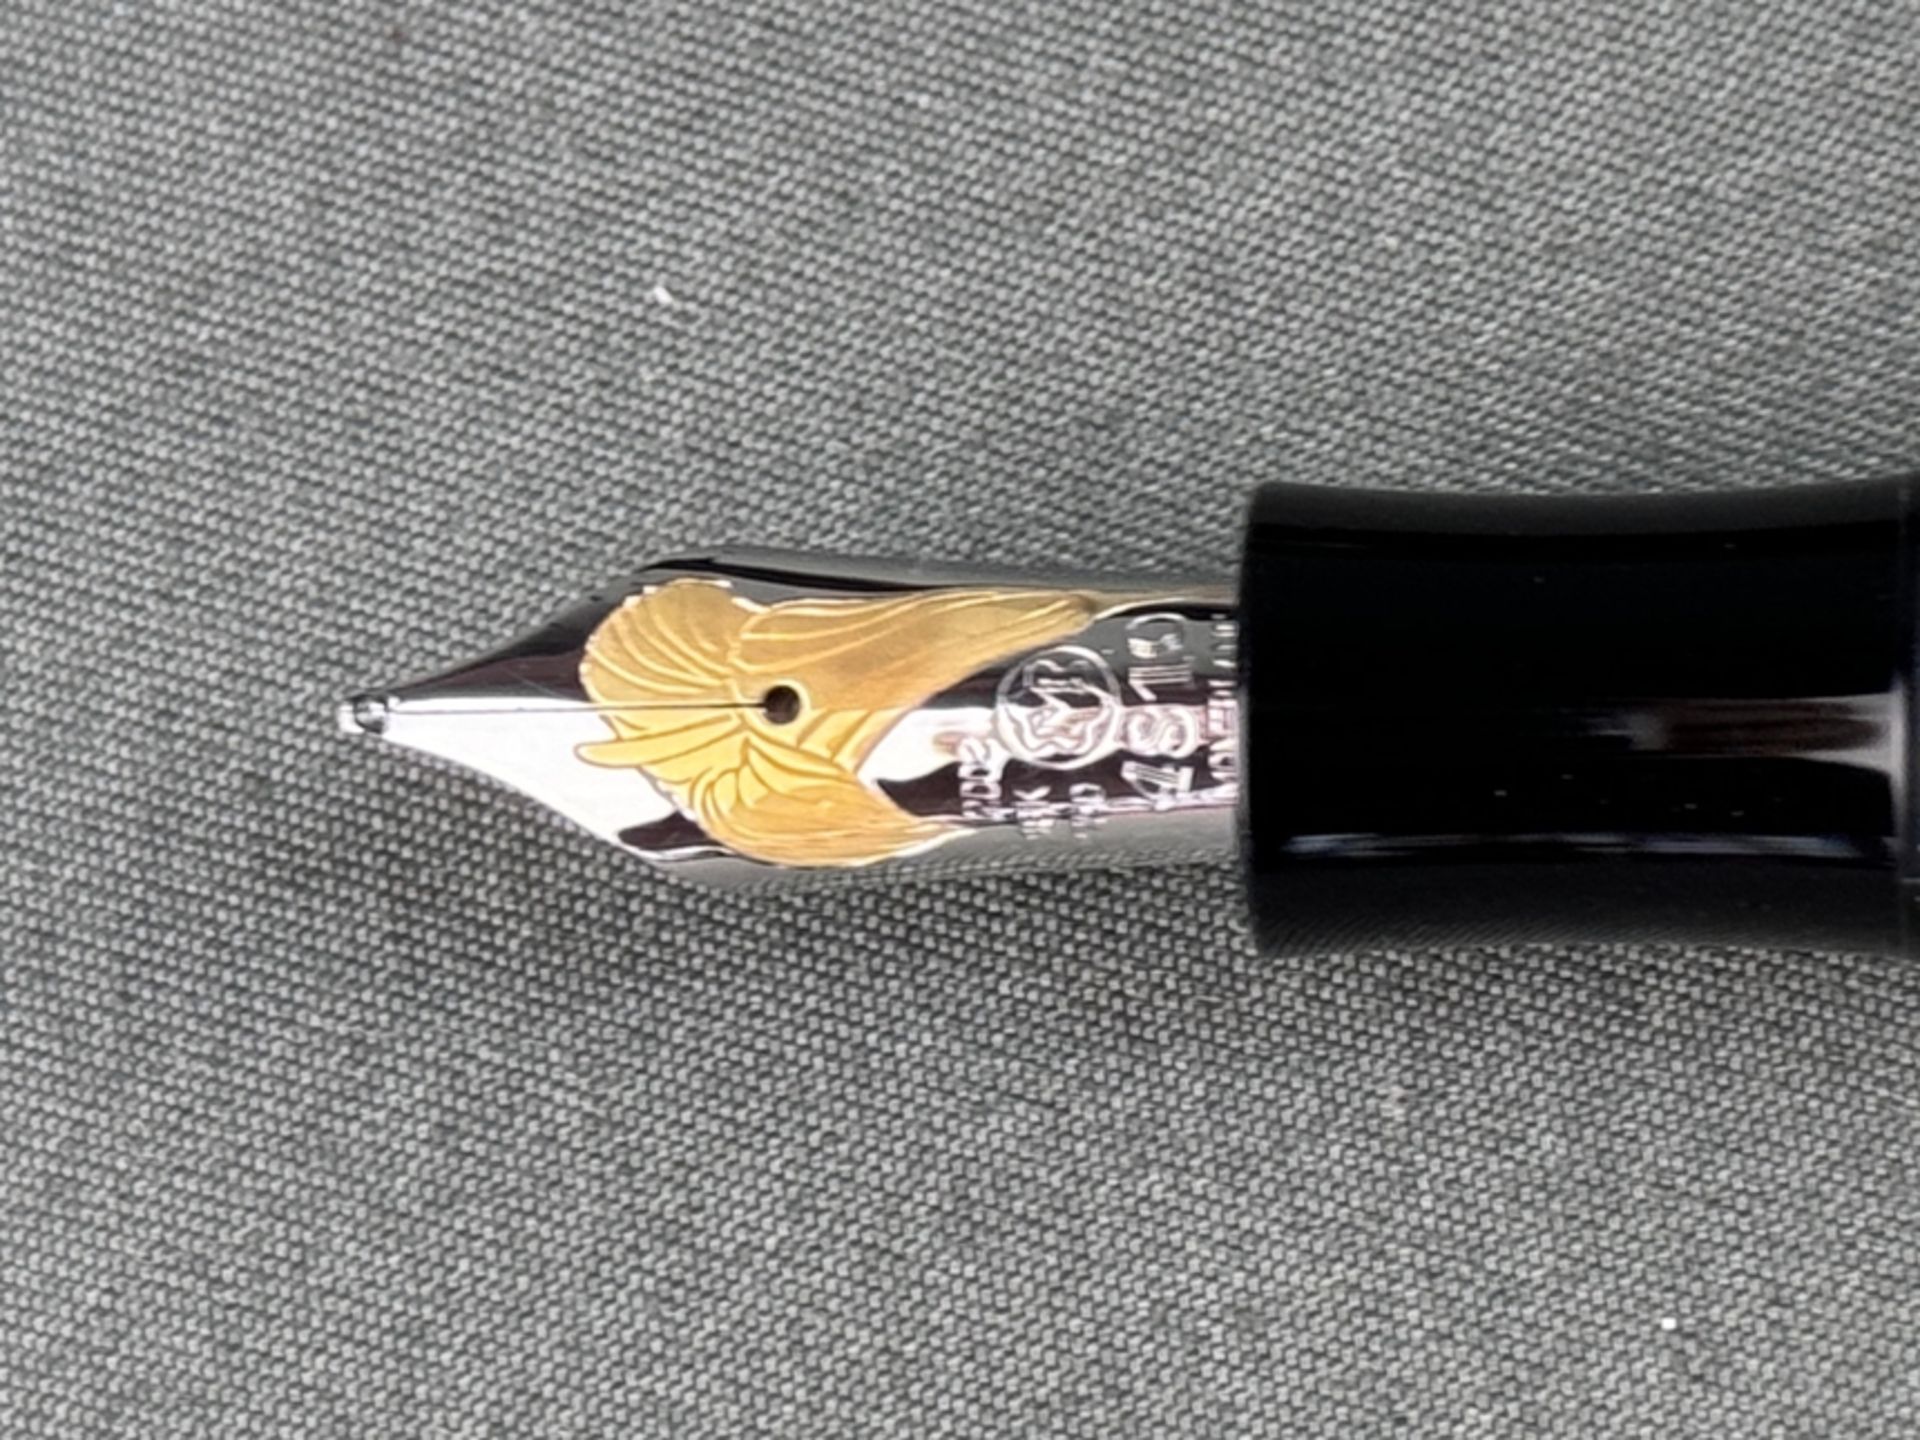 Montblanc fountain pen "Andrew Carnegie", limited edition 2178/4810, piston fountain pen with 750/1 - Image 3 of 5